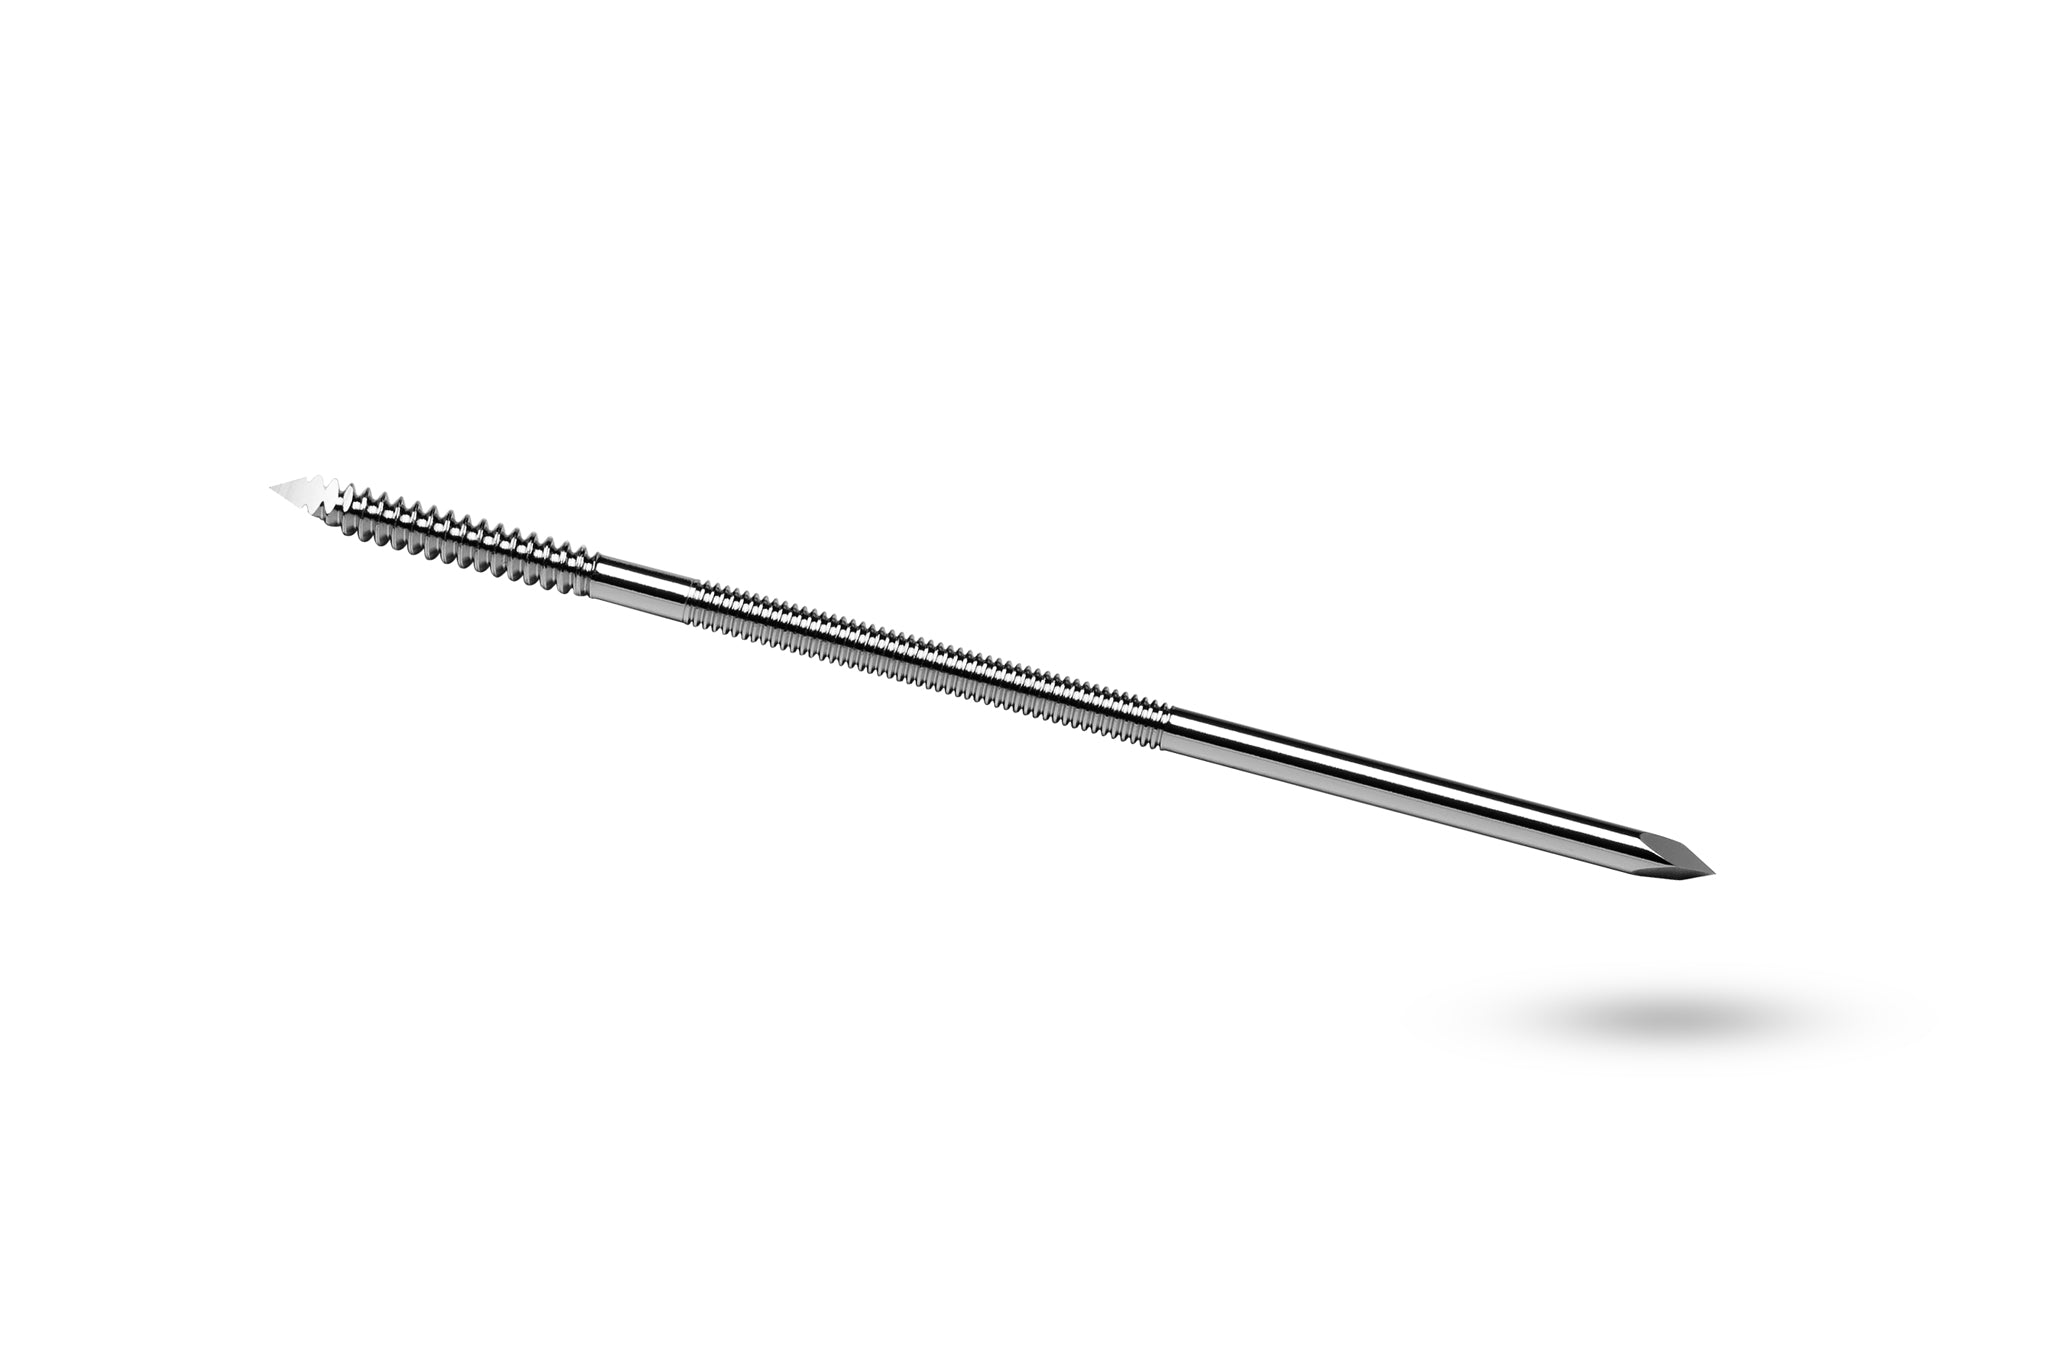 Miniature Interface Fixation Half-pin with Roughened Center, Centrally Threaded, Trocar Point on Each End